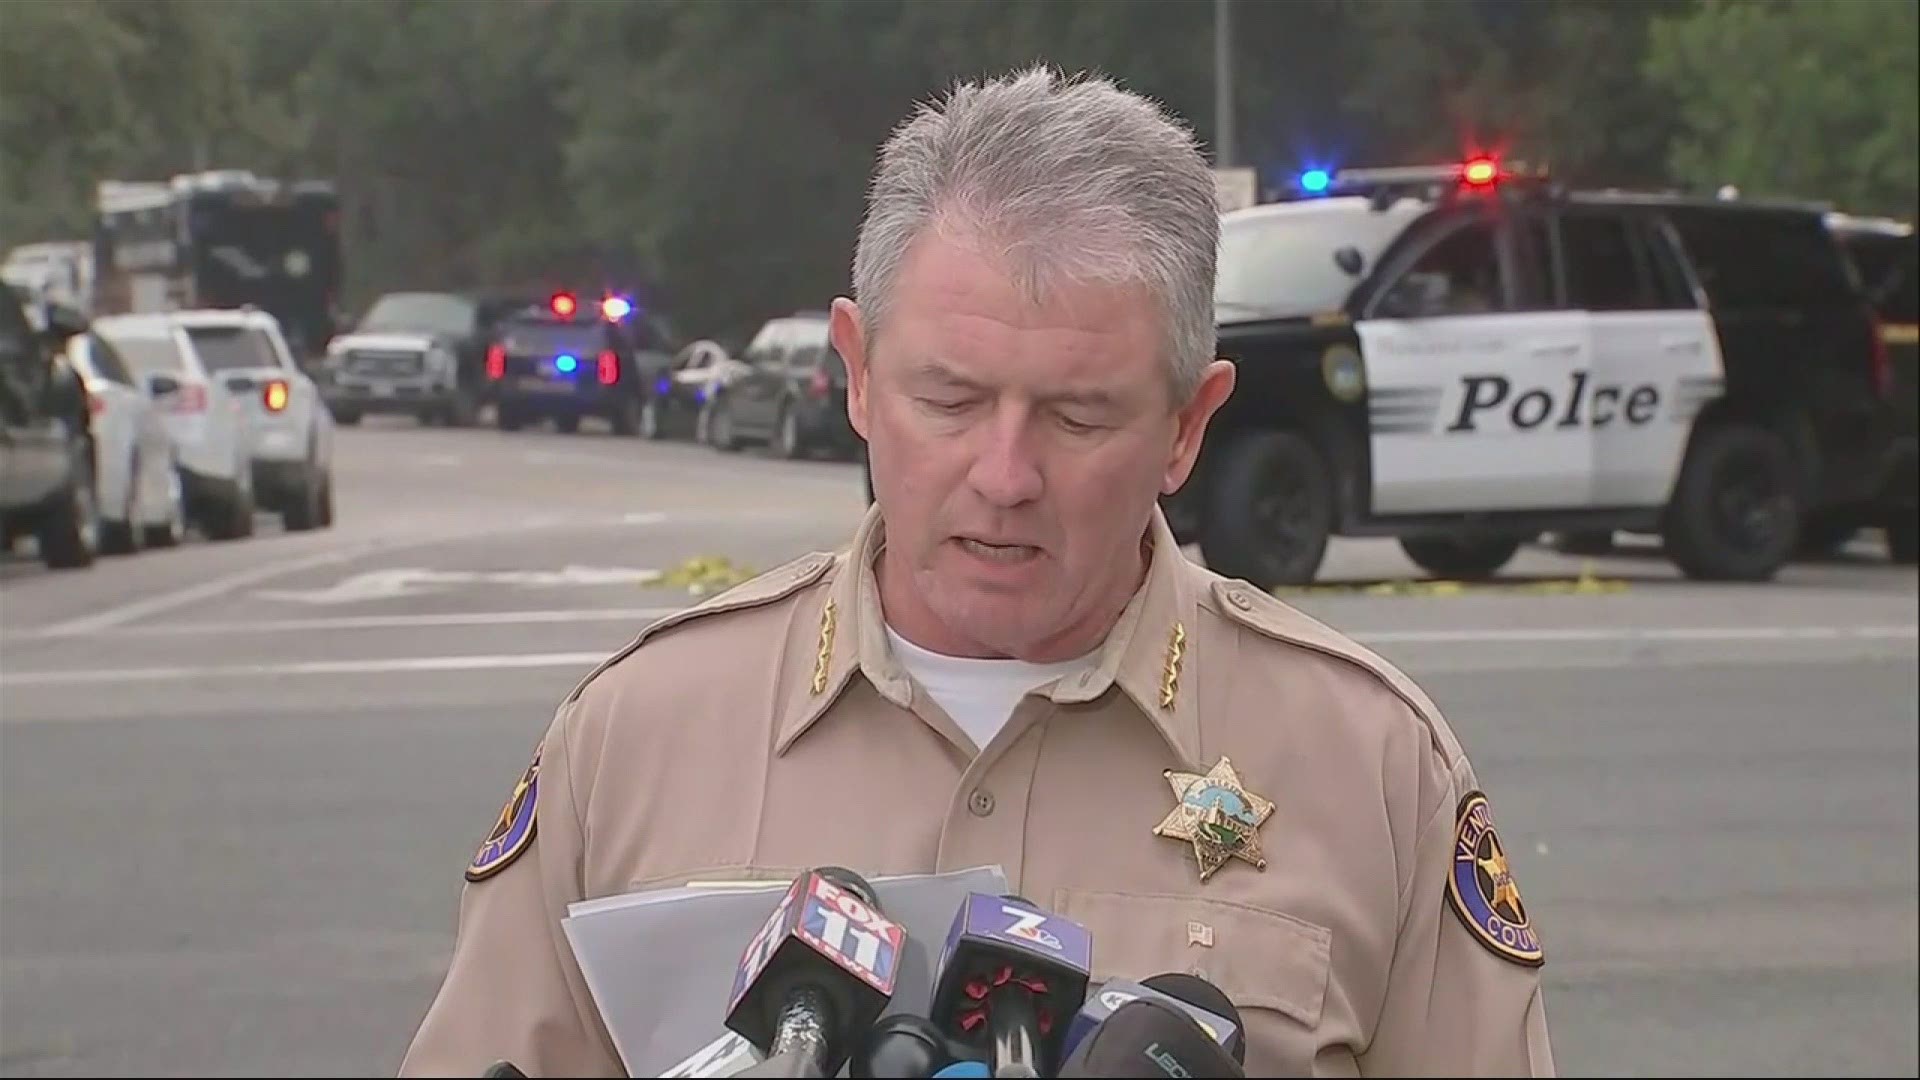 The Ventura County Sheriff says his department had several previous contacts with the former Marine identified as a suspect in a deadly California bar shooting. (Video: KABC via AP)